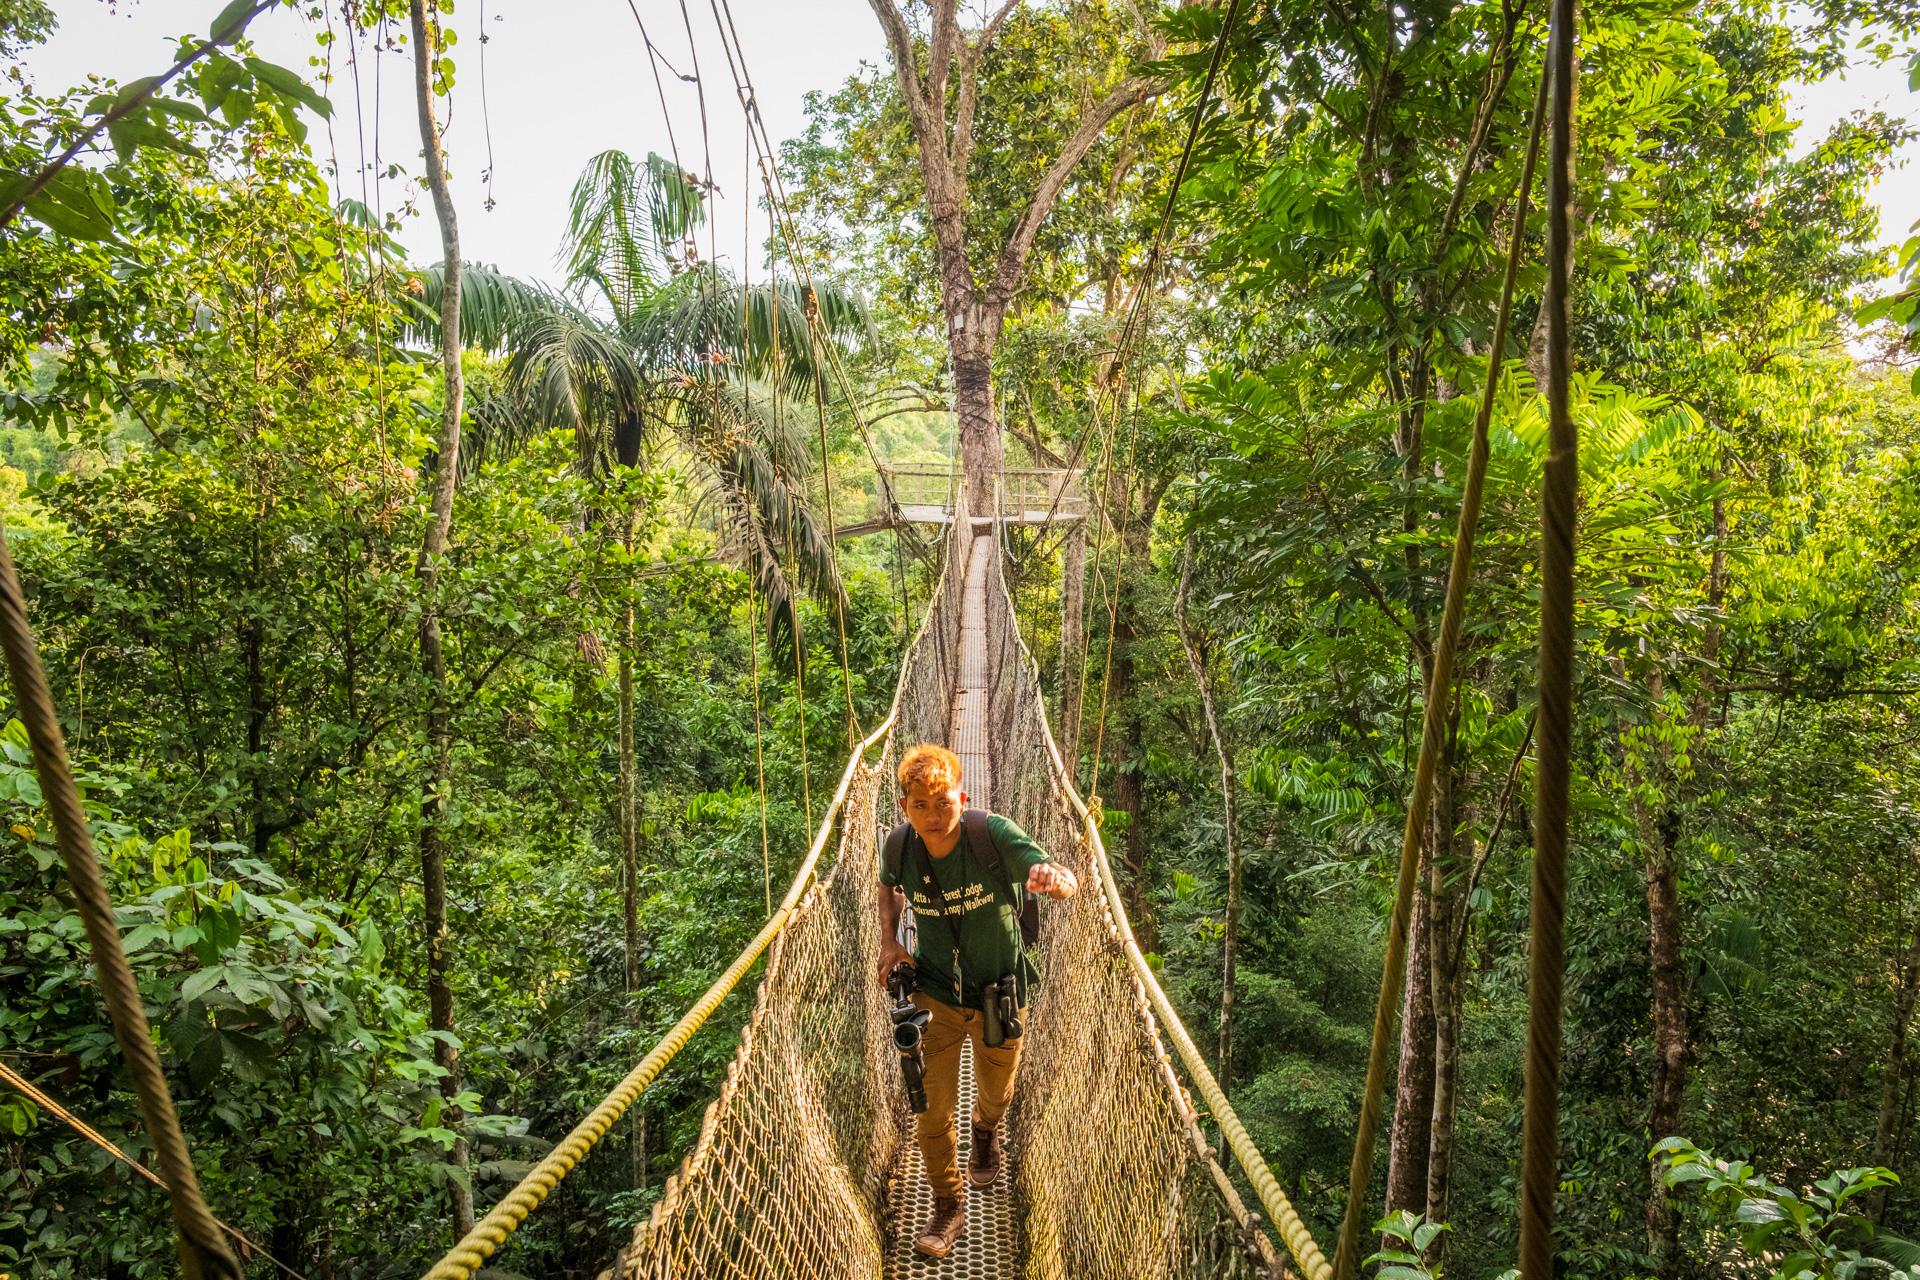 Rainforest Guide on Canopy Walkway.